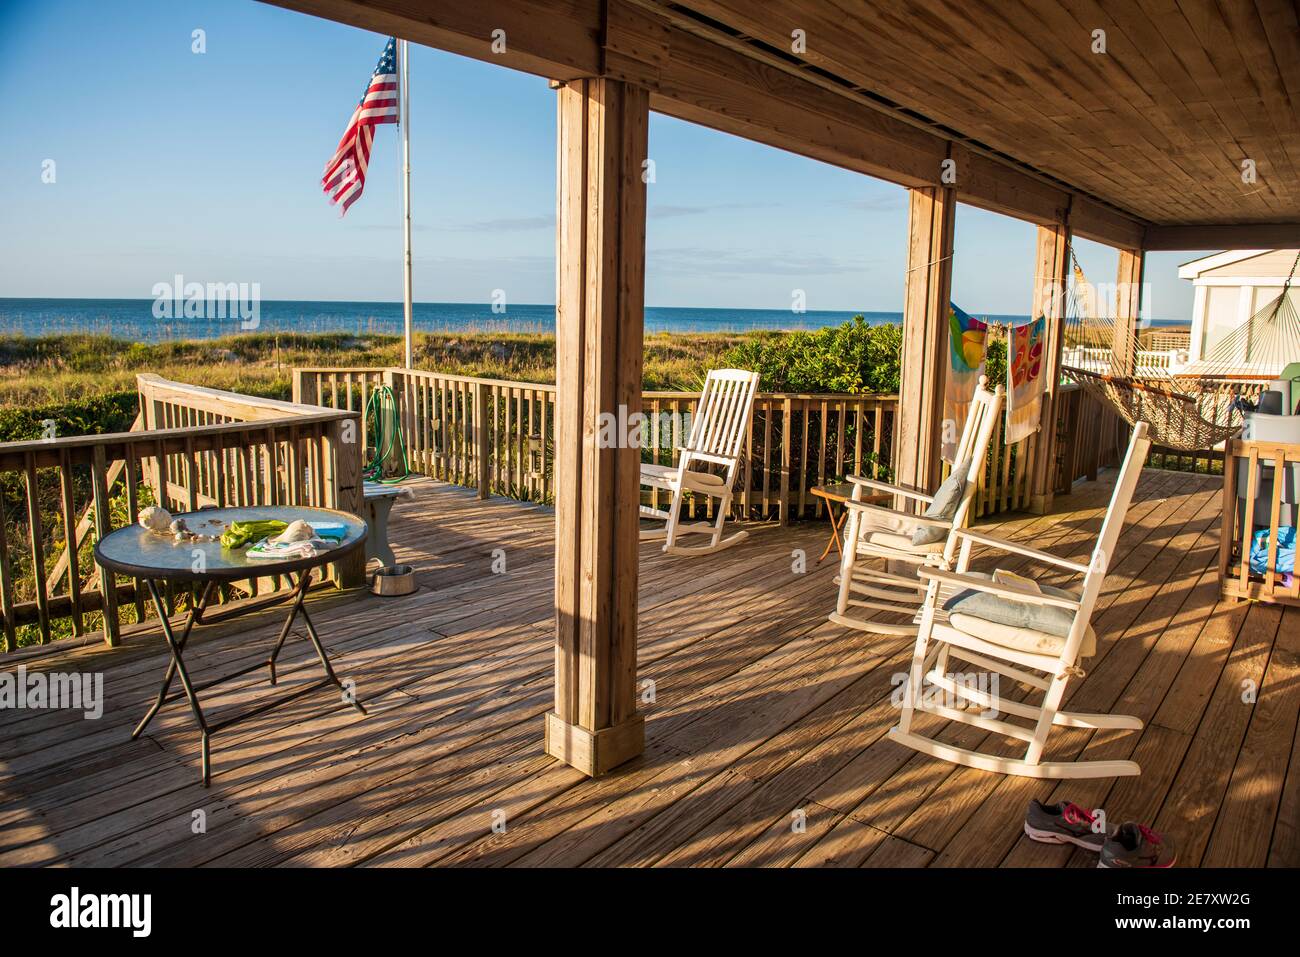 The Atlantic Ocean can be seen from the deck of a vacation rental house in Atlantic Beach, North Carolina. Stock Photo